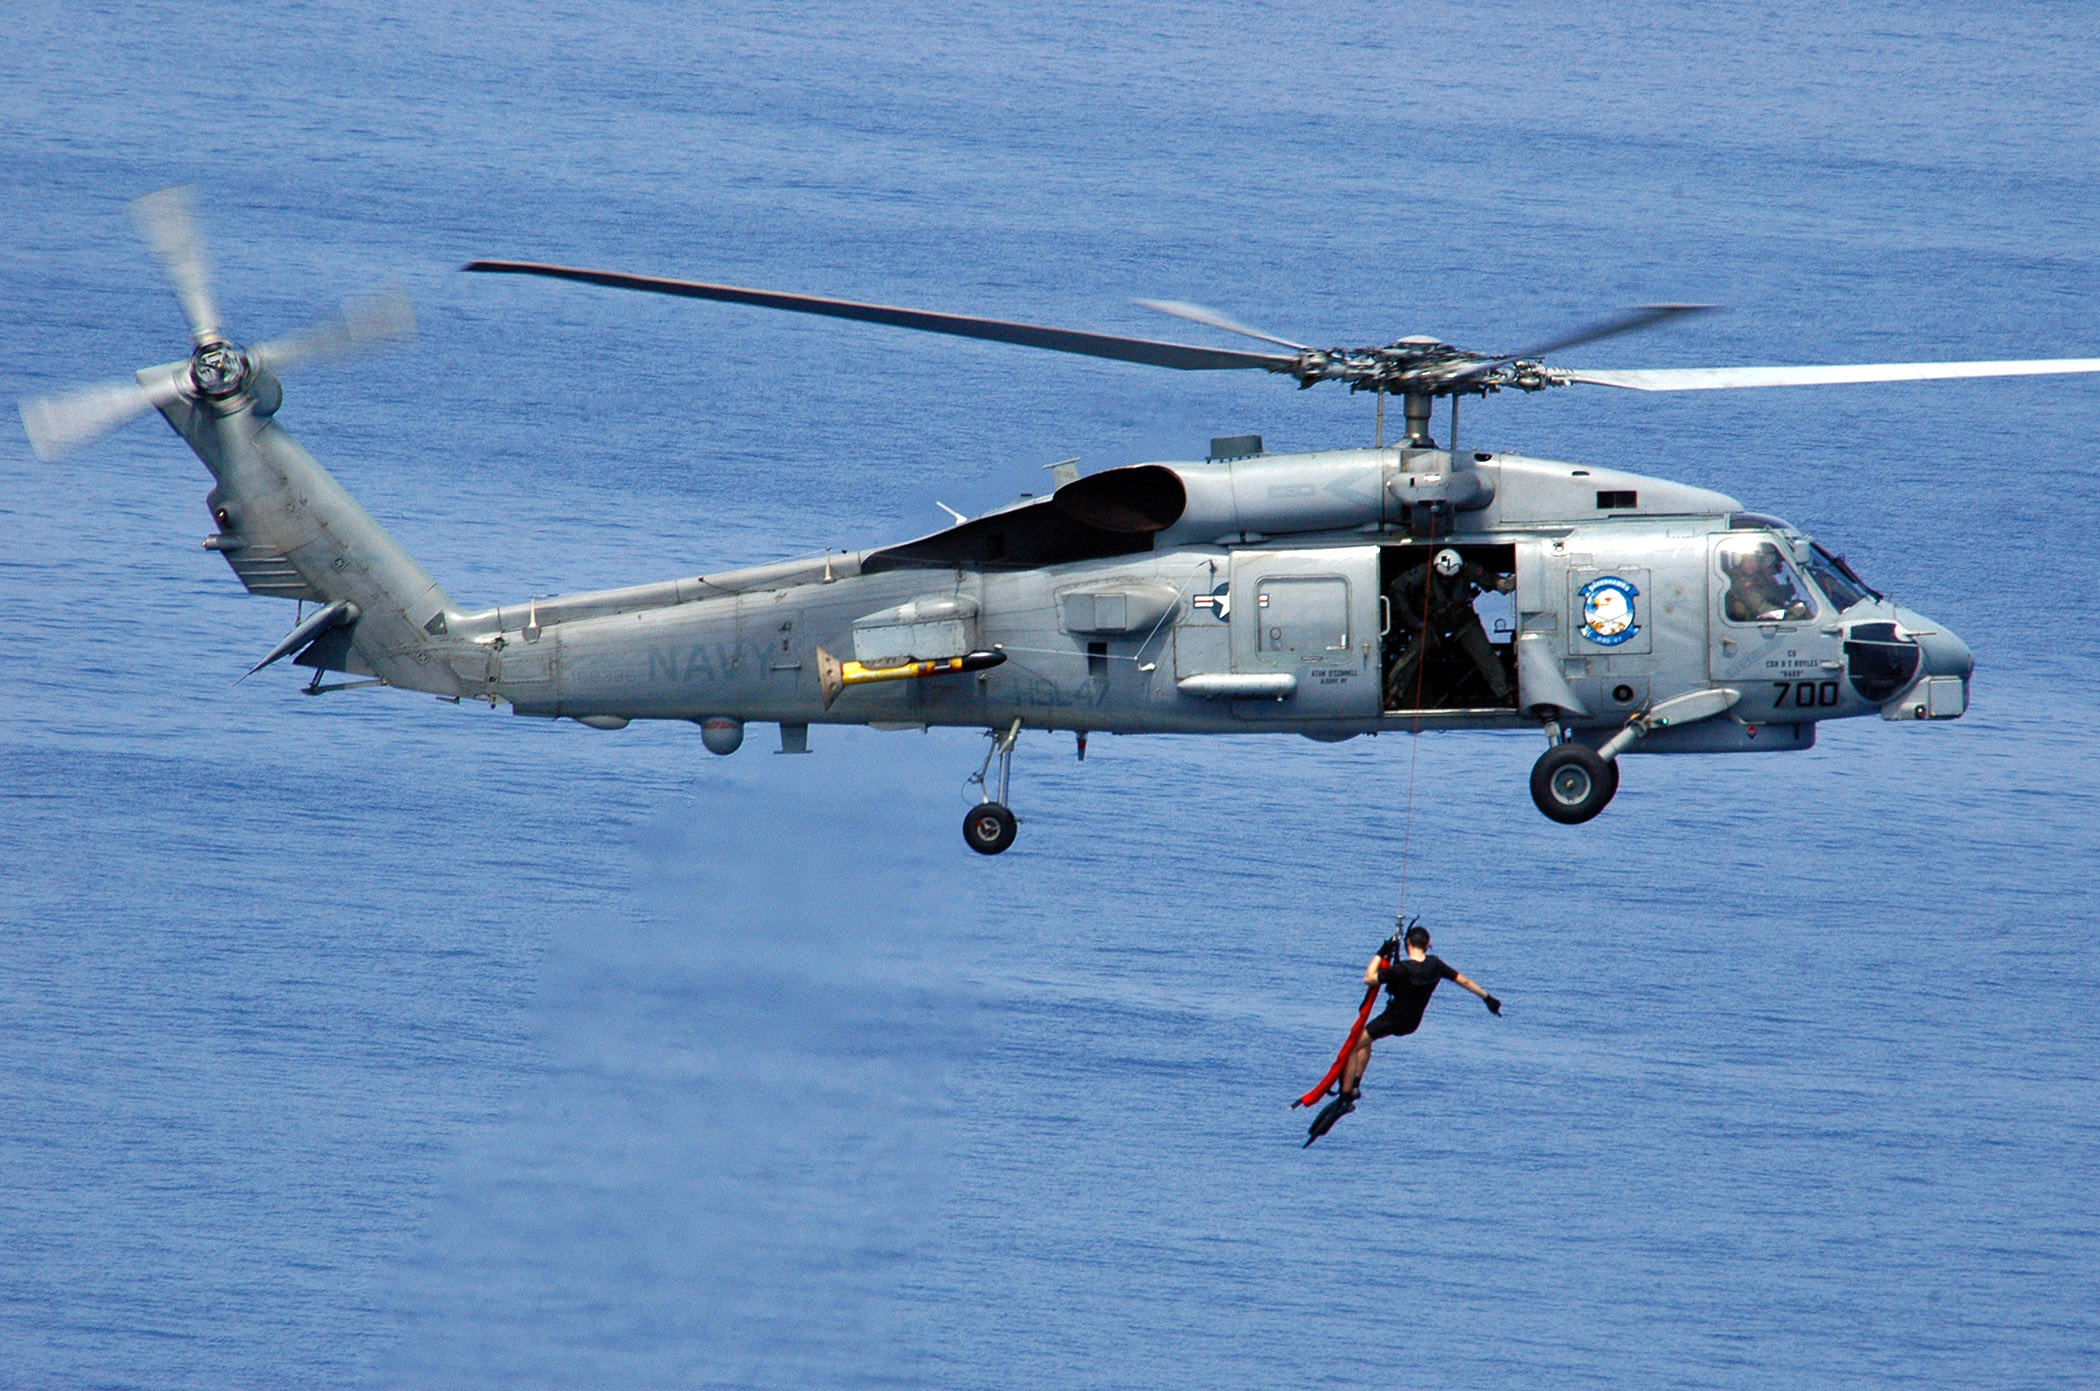 US Navy 060417-N-9079D-095 An SH-60B Seahawk helicopter assigned to Helicopter Anti-Submarine Squadron Light Four Seven (HSL-47) deploys a search and rescue swimmer